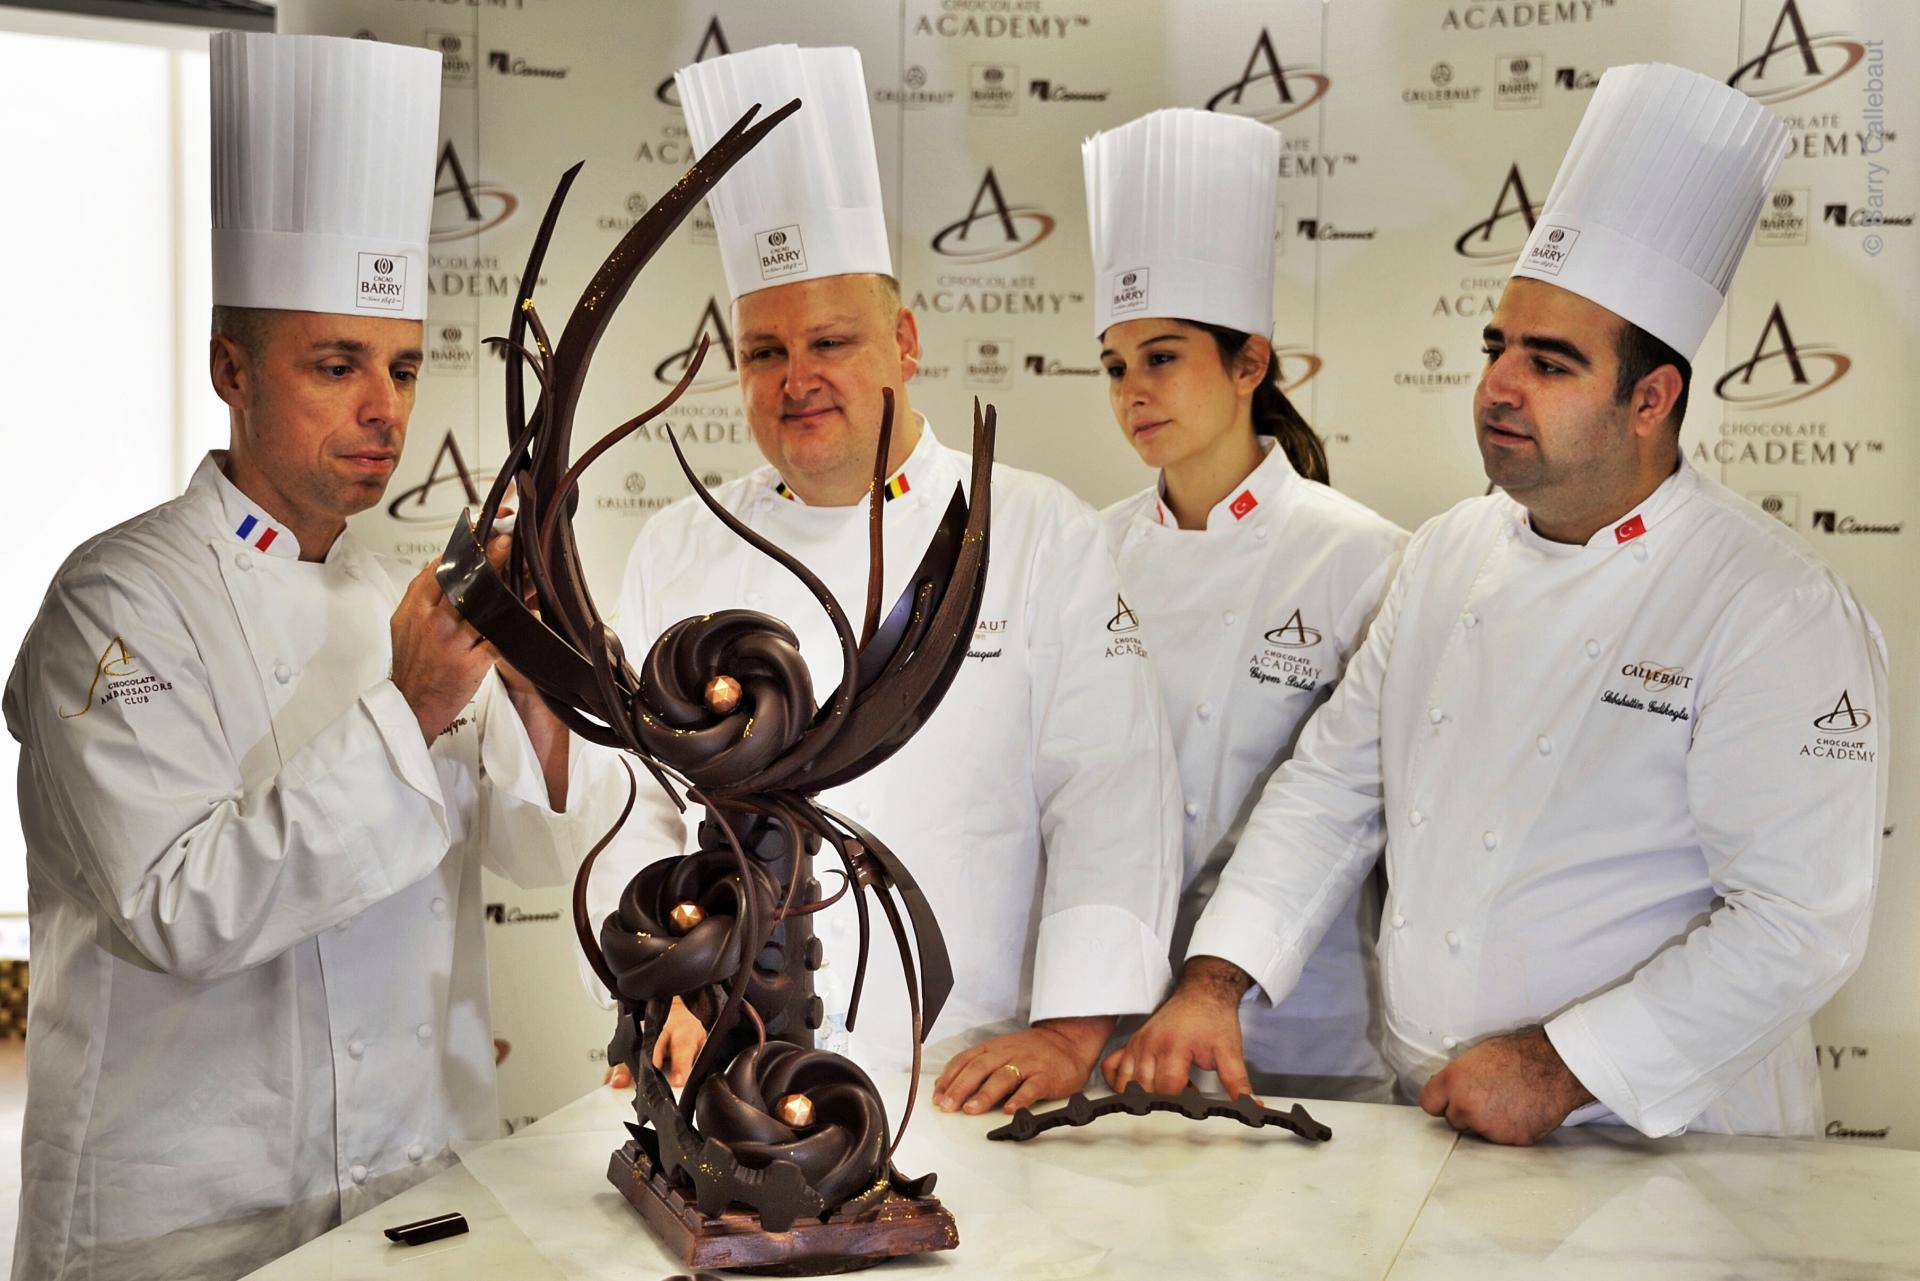 Barry Callebaut inaugurates its first CHOCOLATE ACADEMY TM center in Turkey